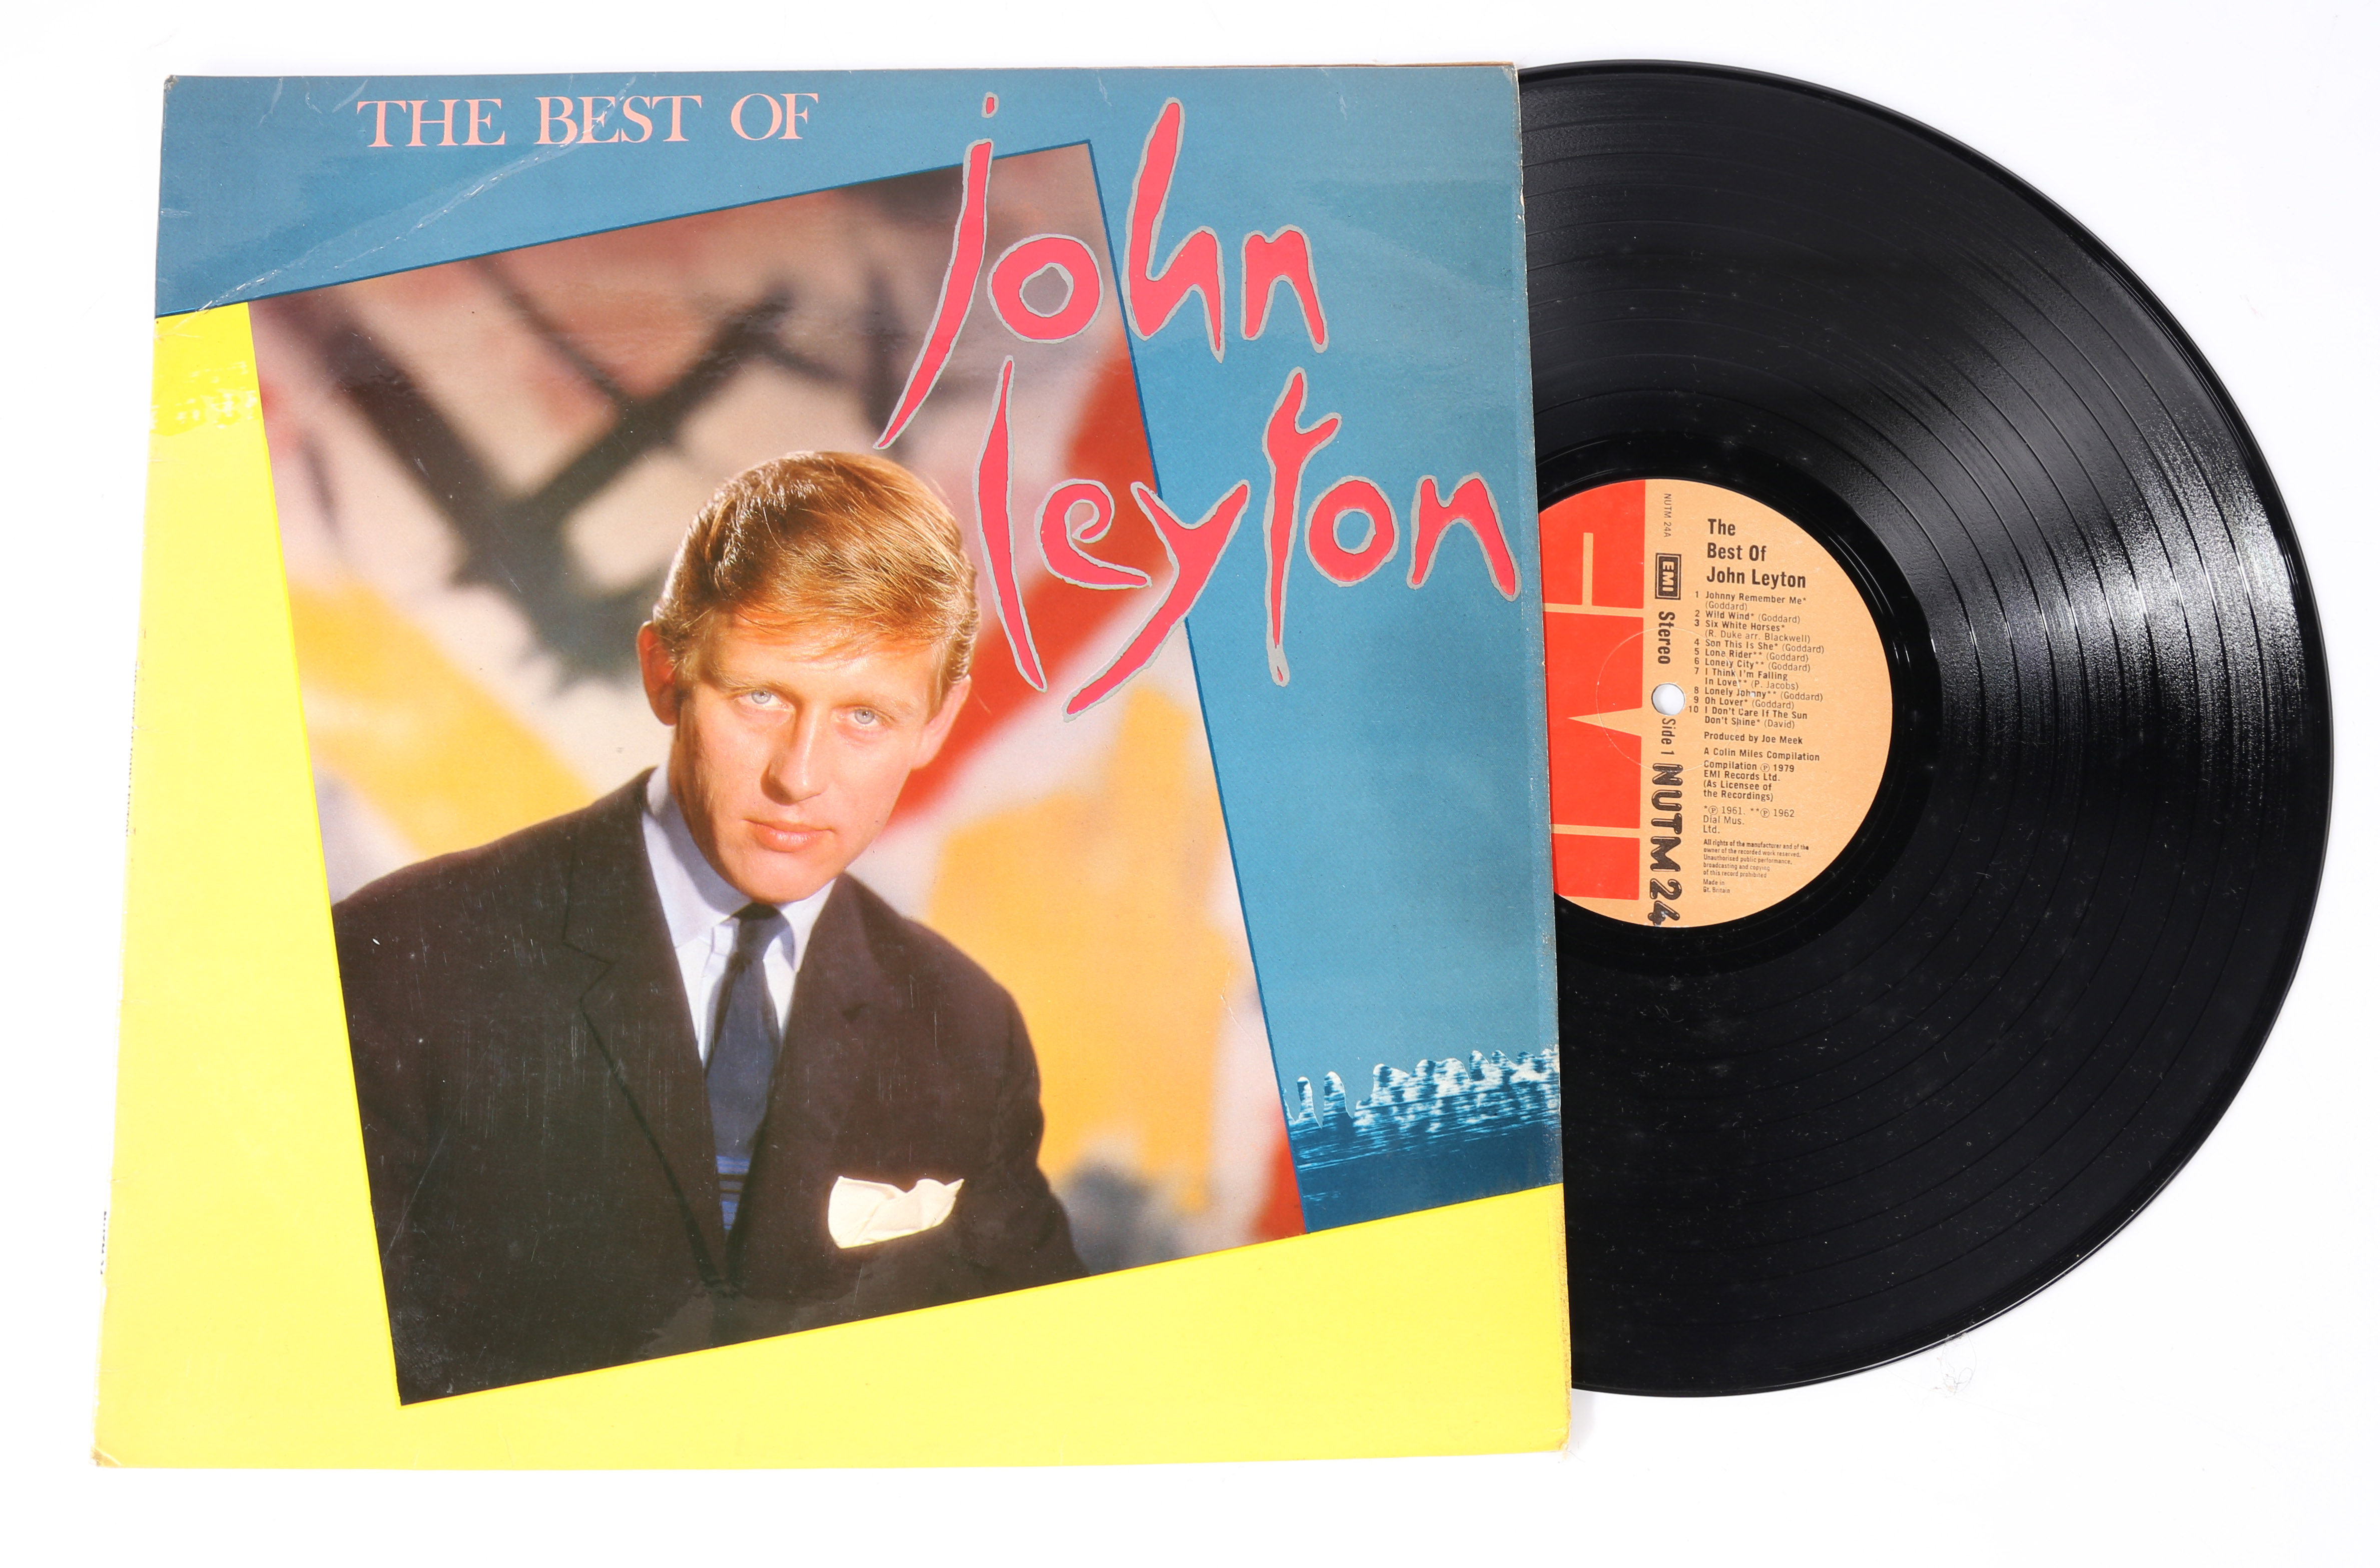 John Leyton. A collection of LPs, 45s, DVDs, and memorabilia relating to the music career of John - Image 20 of 32